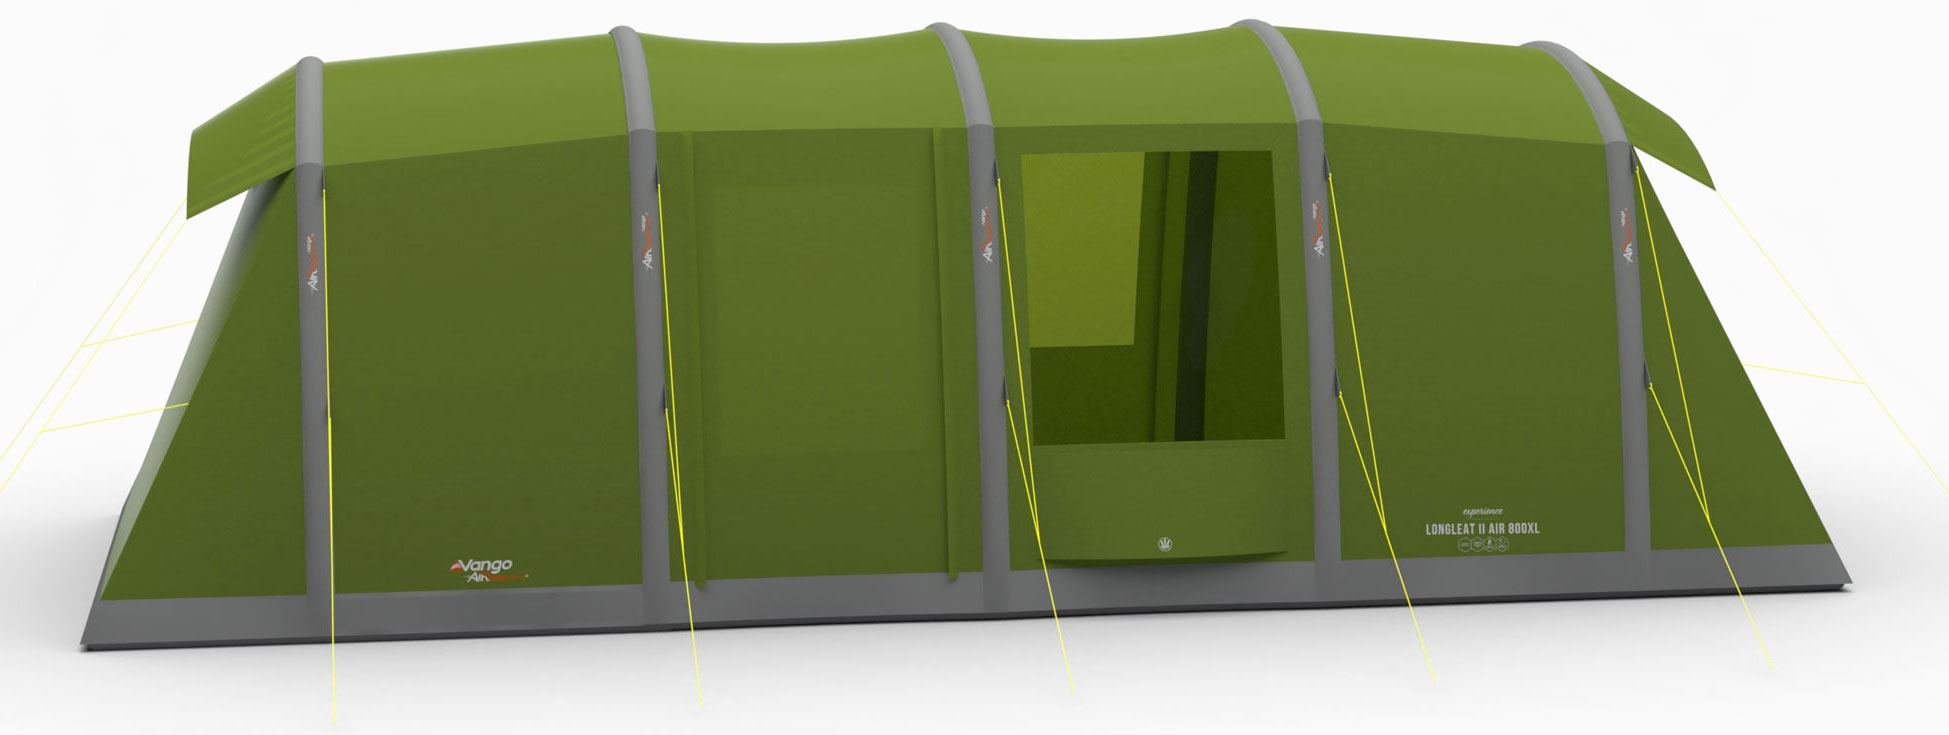 Inflatable family tent